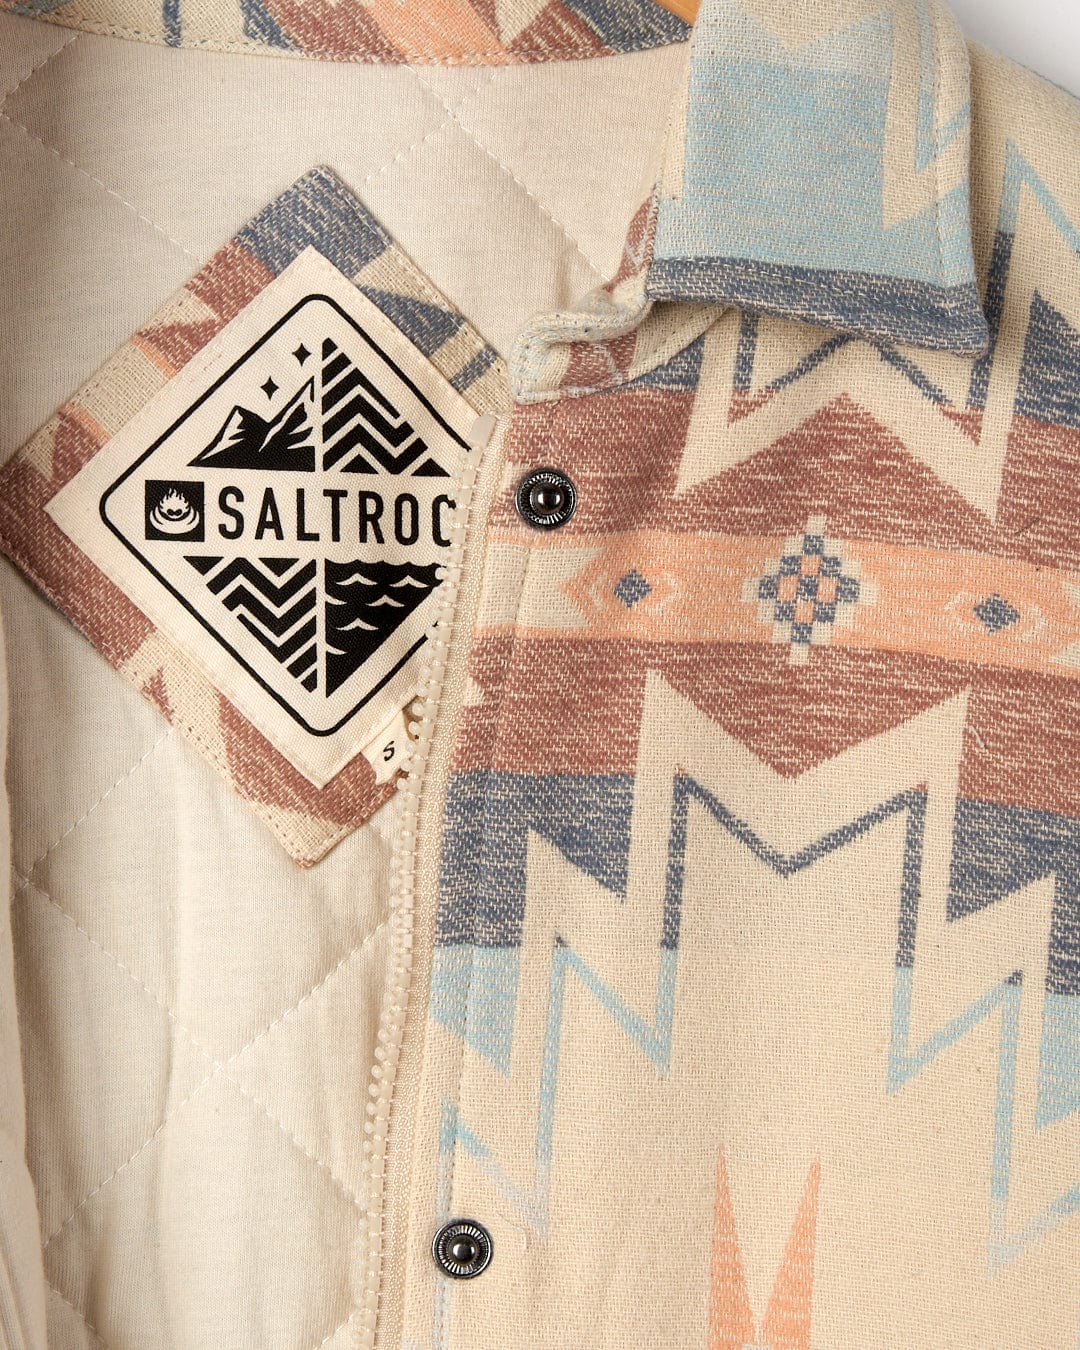 A close-up of a Mylene Aztec Jacket in Cream with a Saltrock brand label, showcasing the Aztec print jacket design.